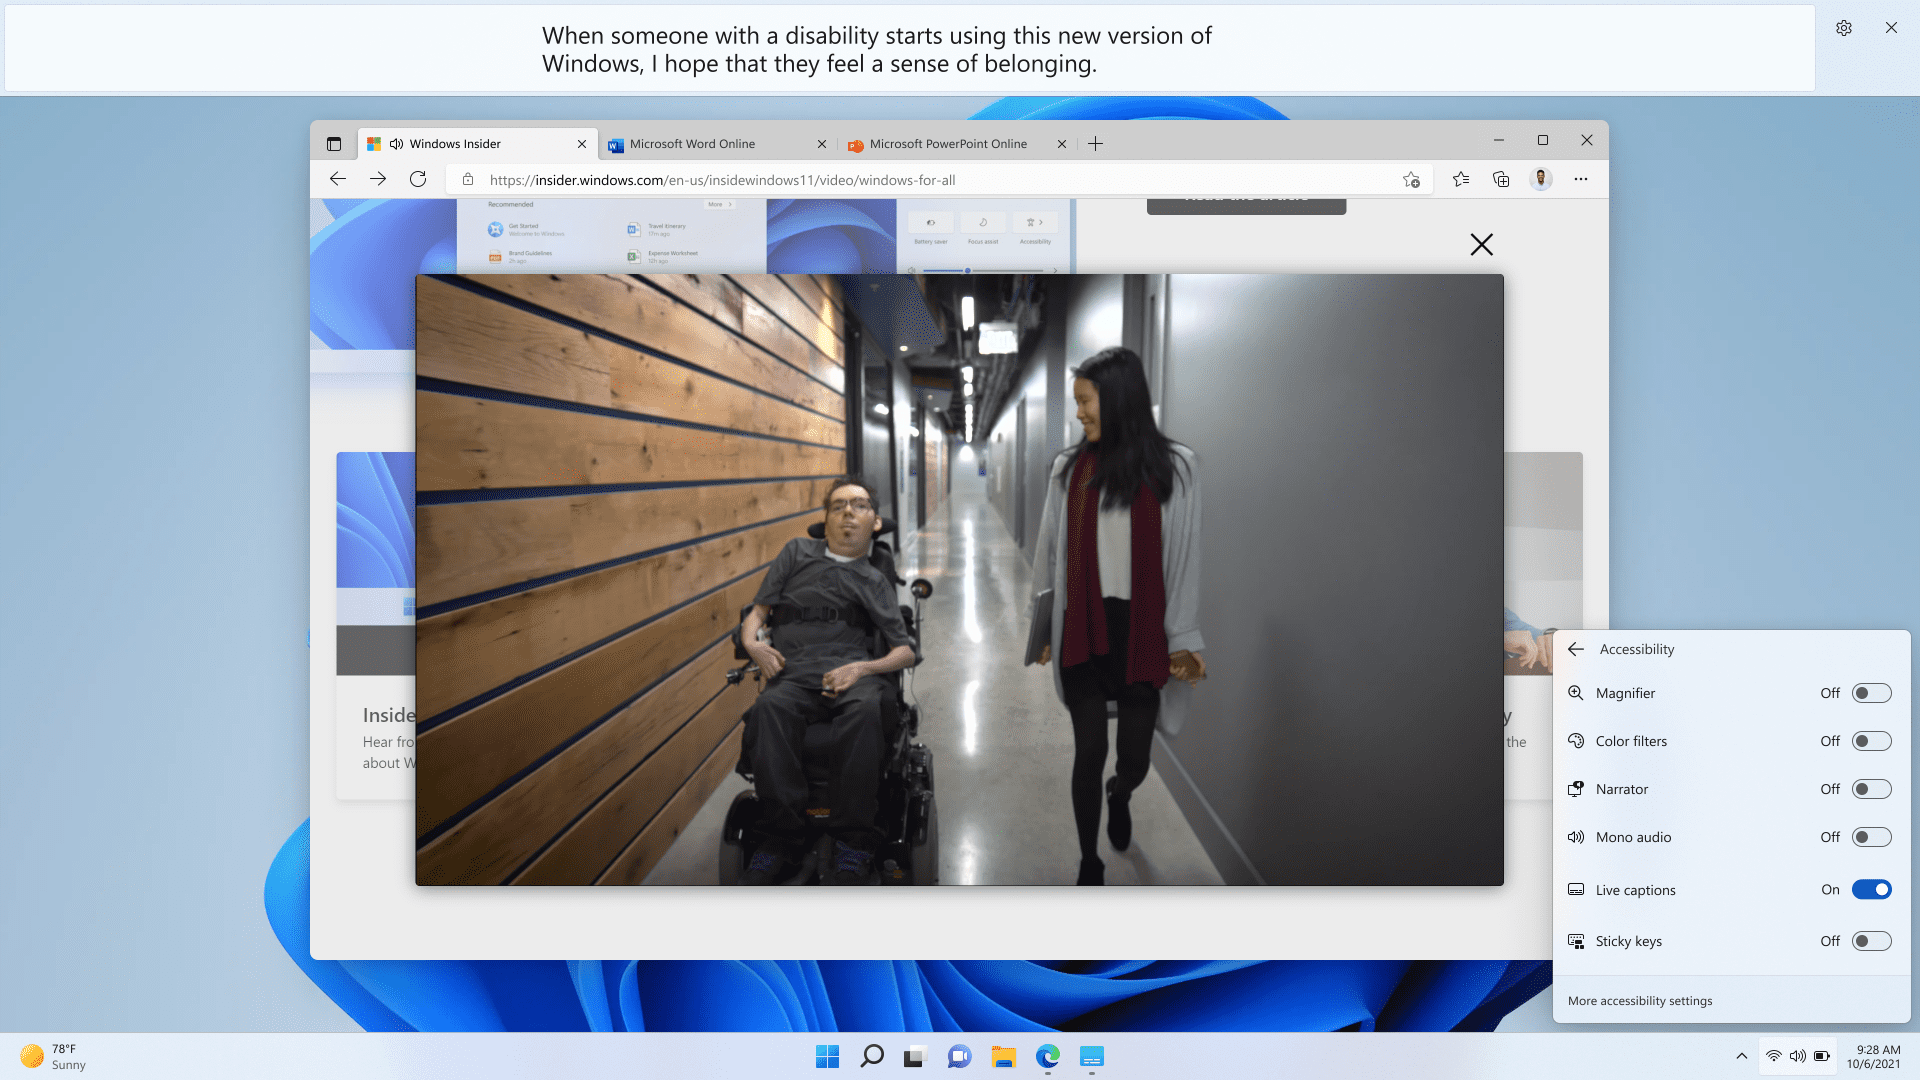 Windows 11 can provide captions for videos and audio.